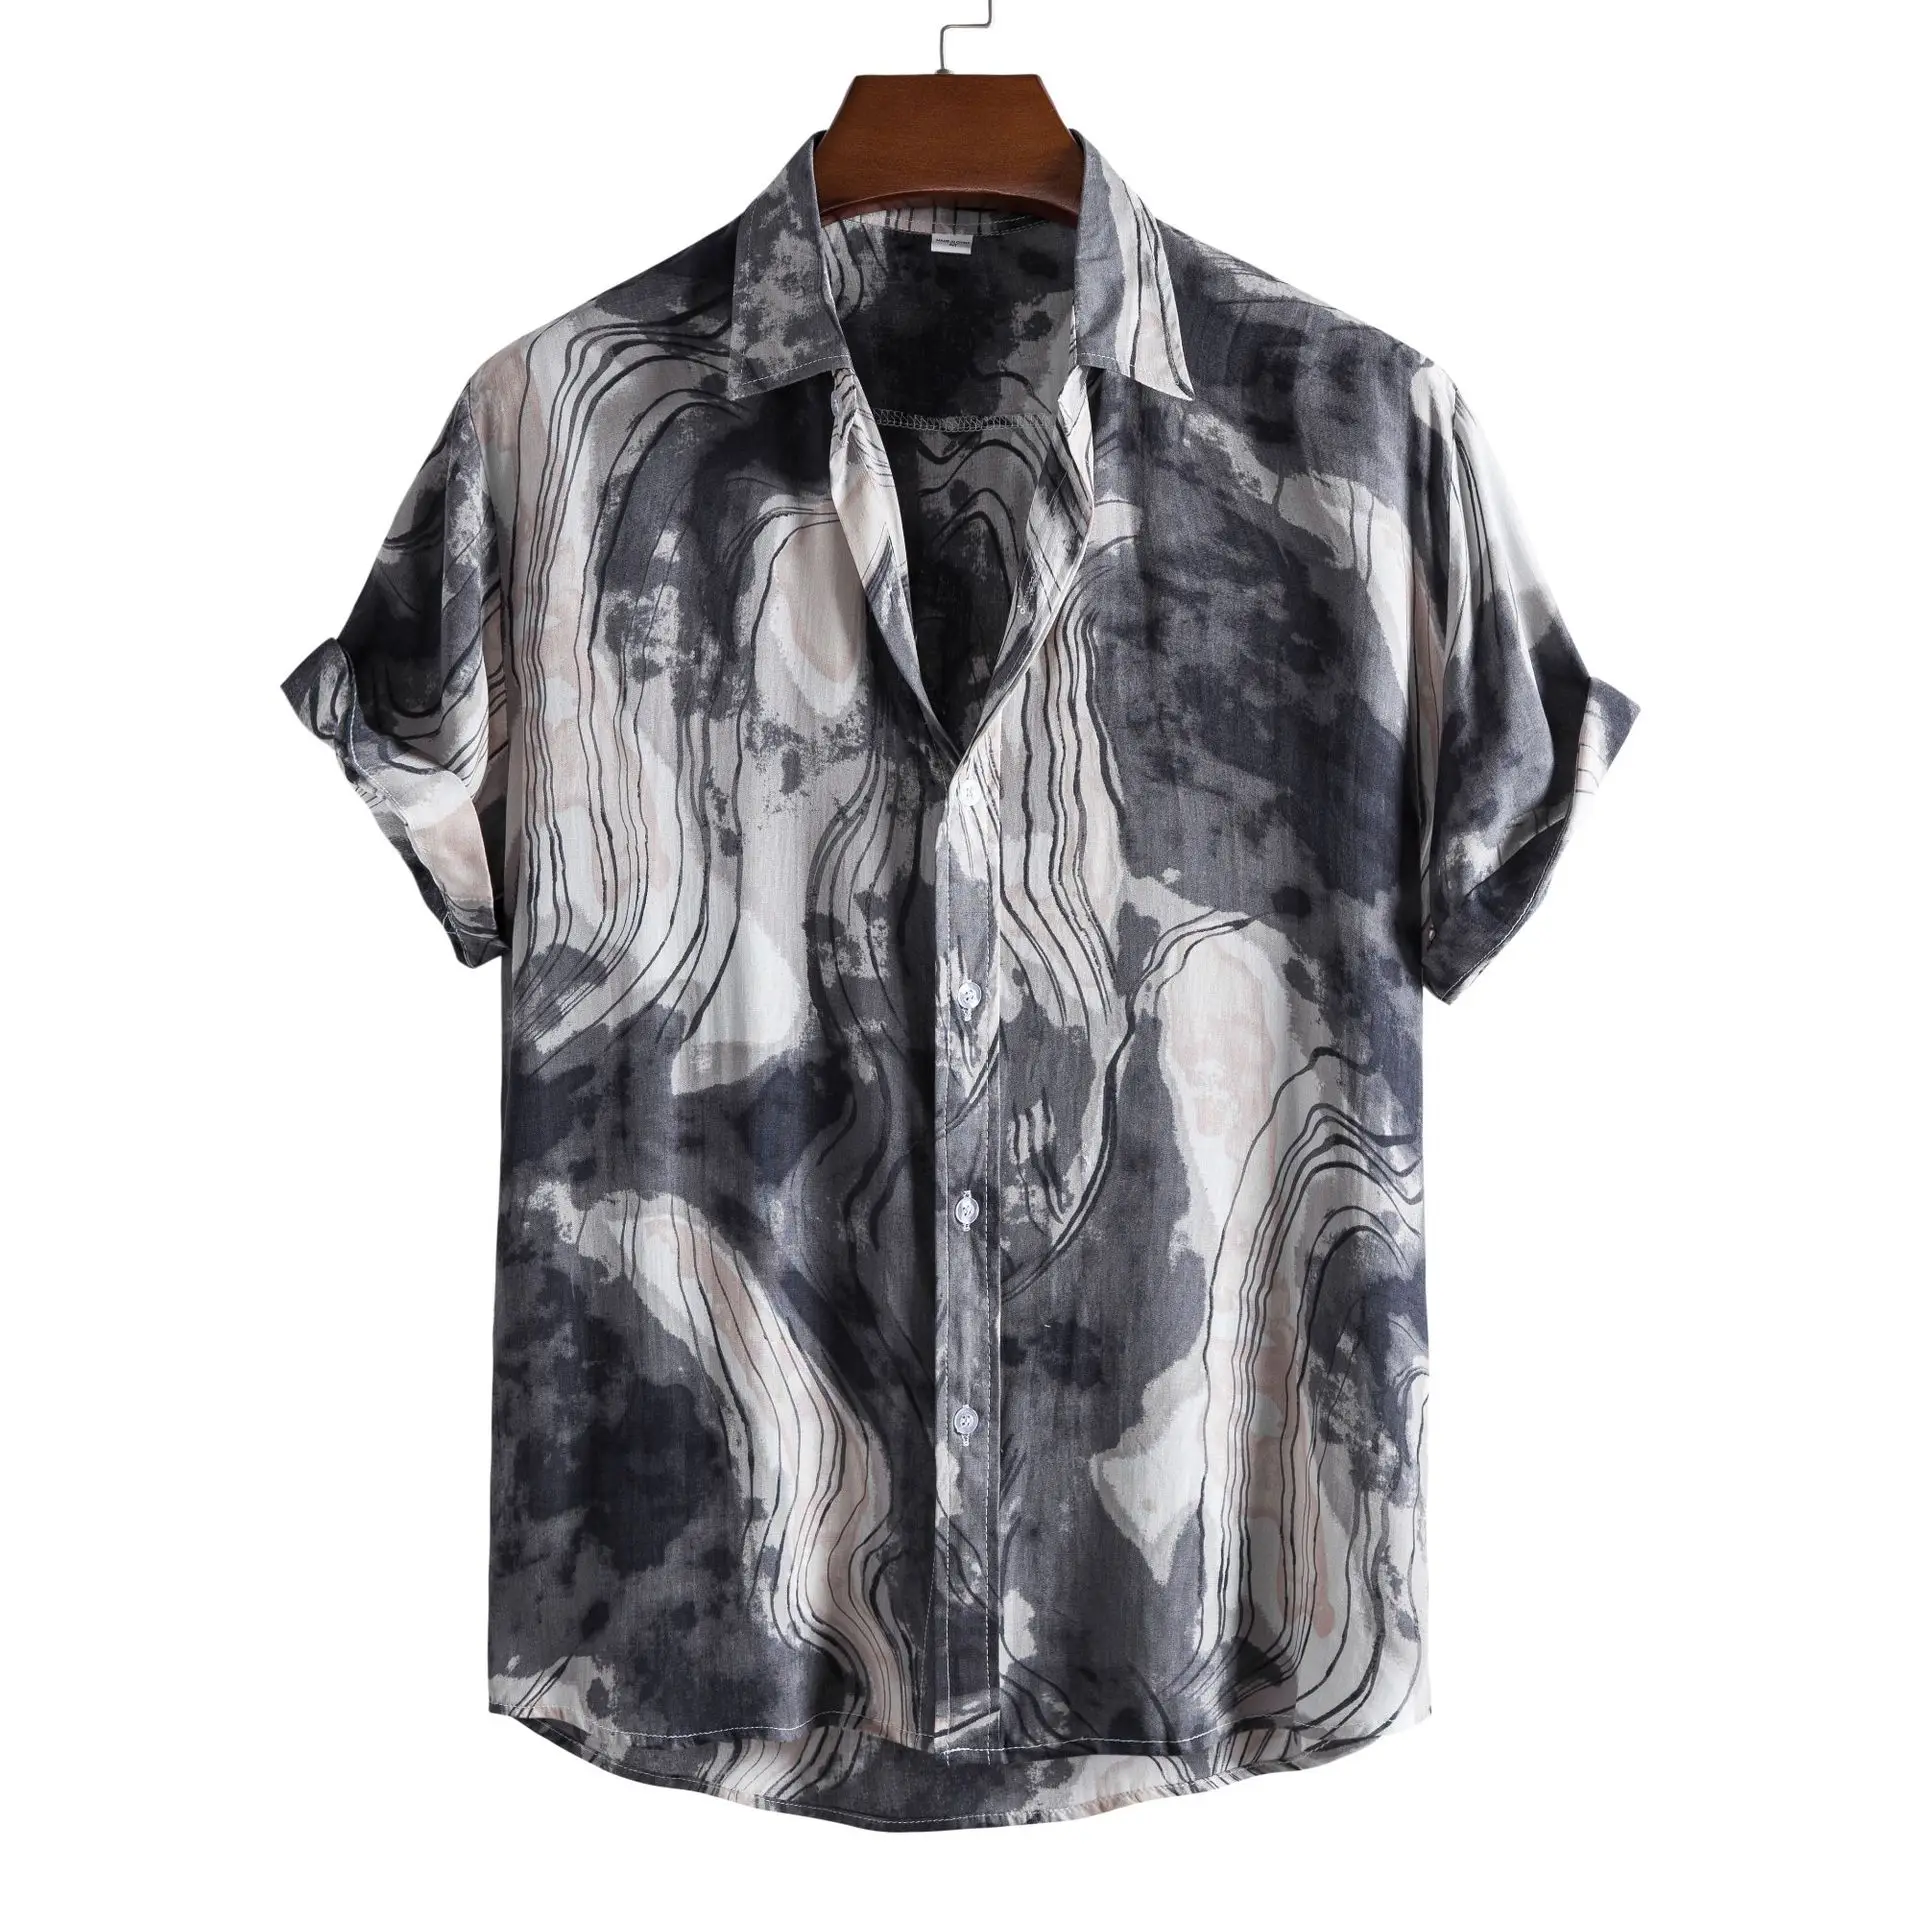 

Male Shirt Oversized Plaid Floral Short Sleeve Tops Summer Casual Holiday Buttons Social Luxury Clothing Men Hawaii Shirts 5XL